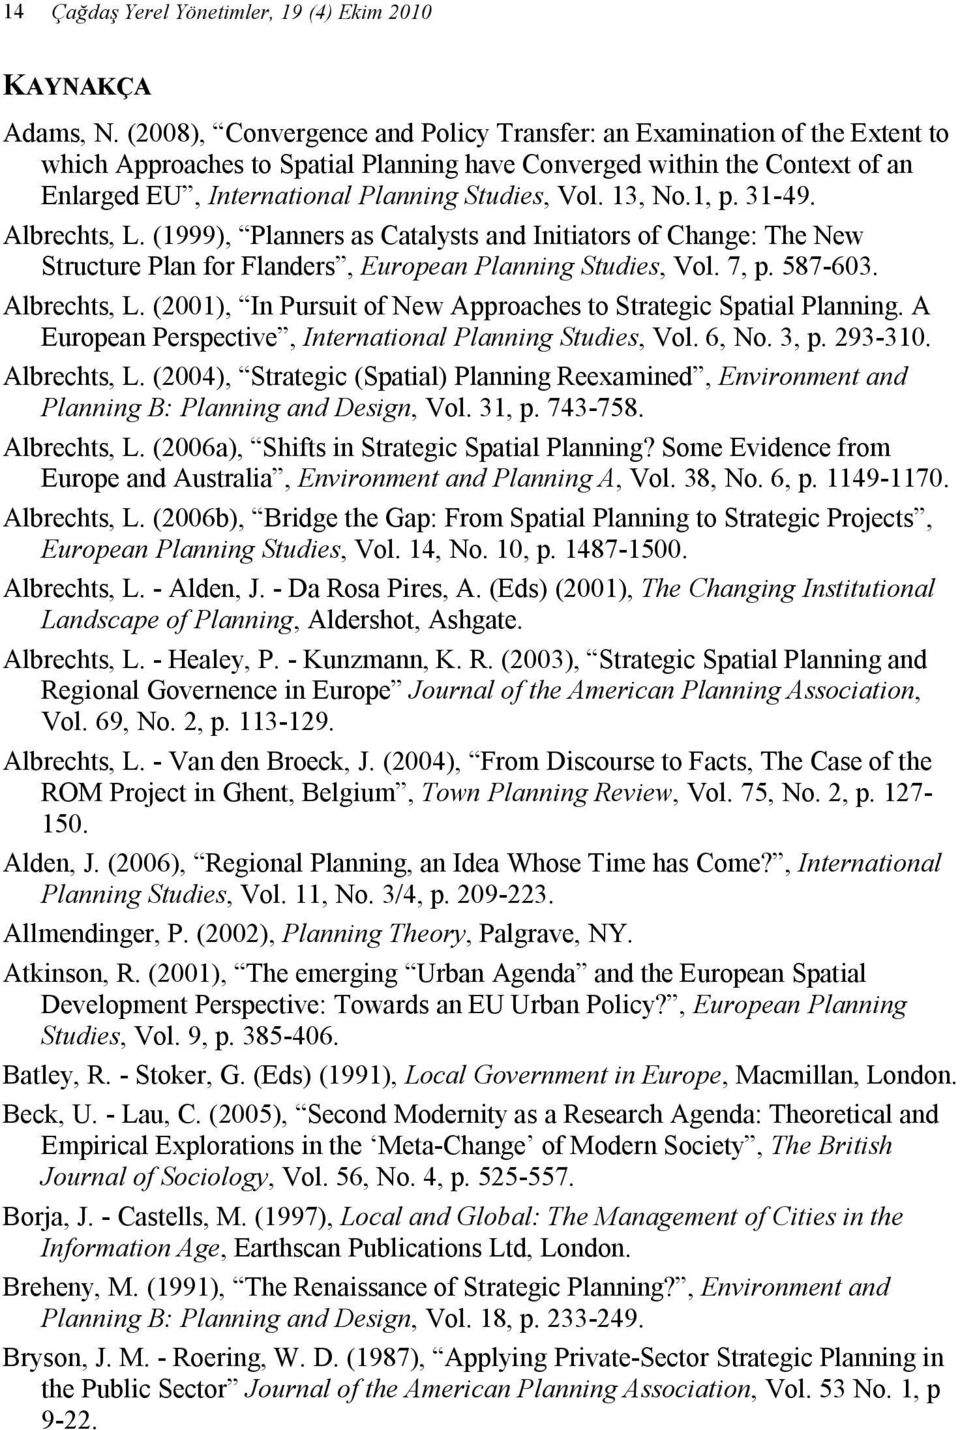 13, No.1, p. 31-49. Albrechts, L. (1999), Planners as Catalysts and Initiators of Change: The New Structure Plan for Flanders, European Planning Studies, Vol. 7, p. 587-603. Albrechts, L. (2001), In Pursuit of New Approaches to Strategic Spatial Planning.